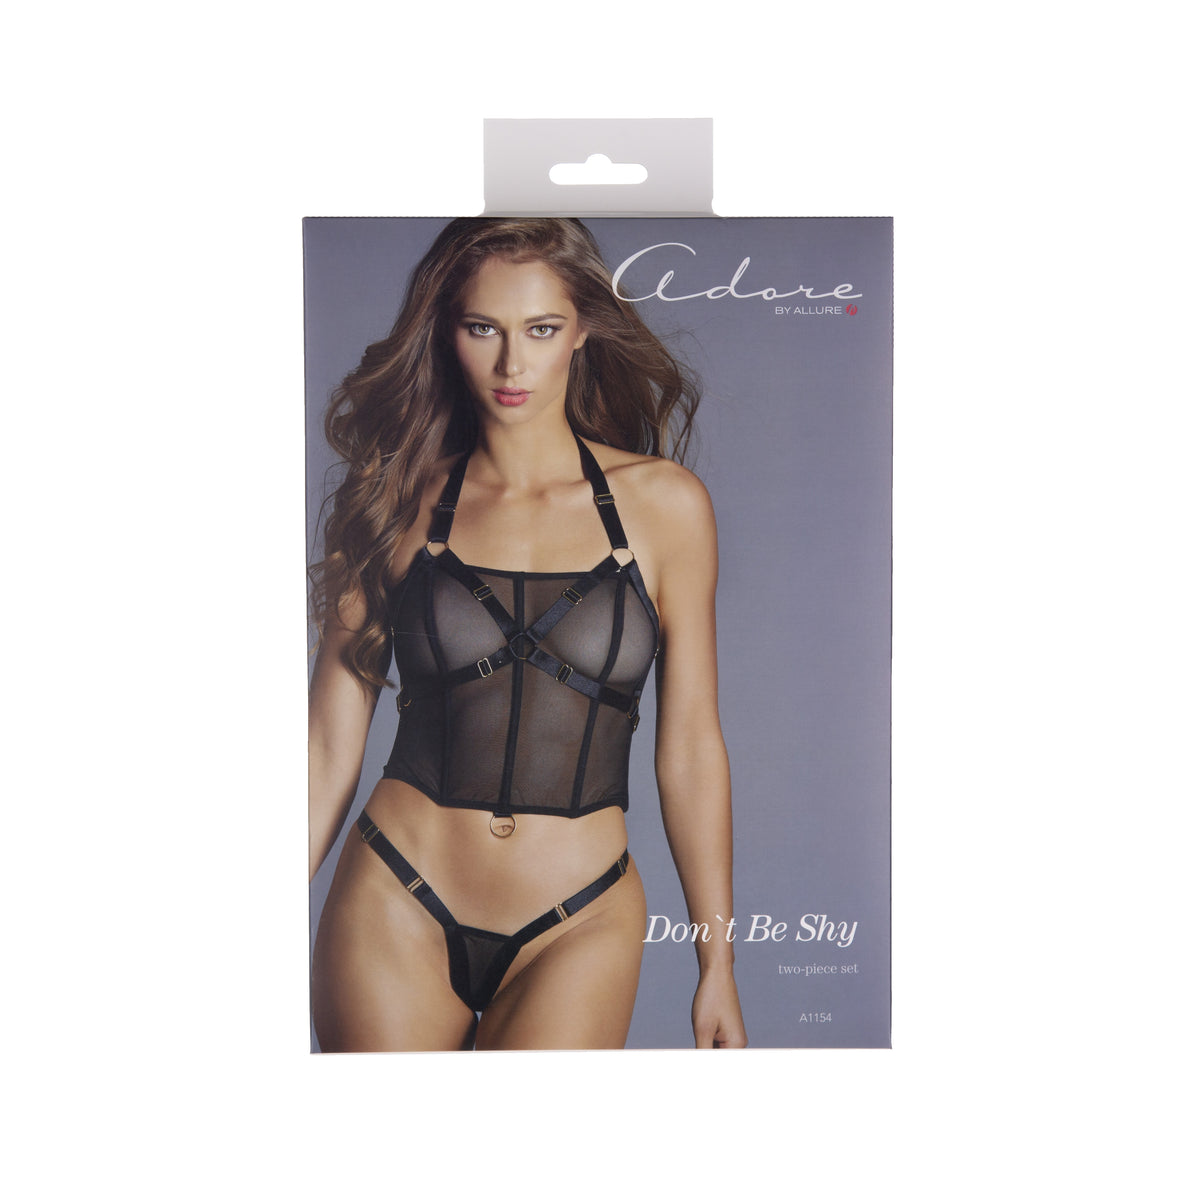 Adore by Allure Don’t Be Shy 2 Piece Set - Black